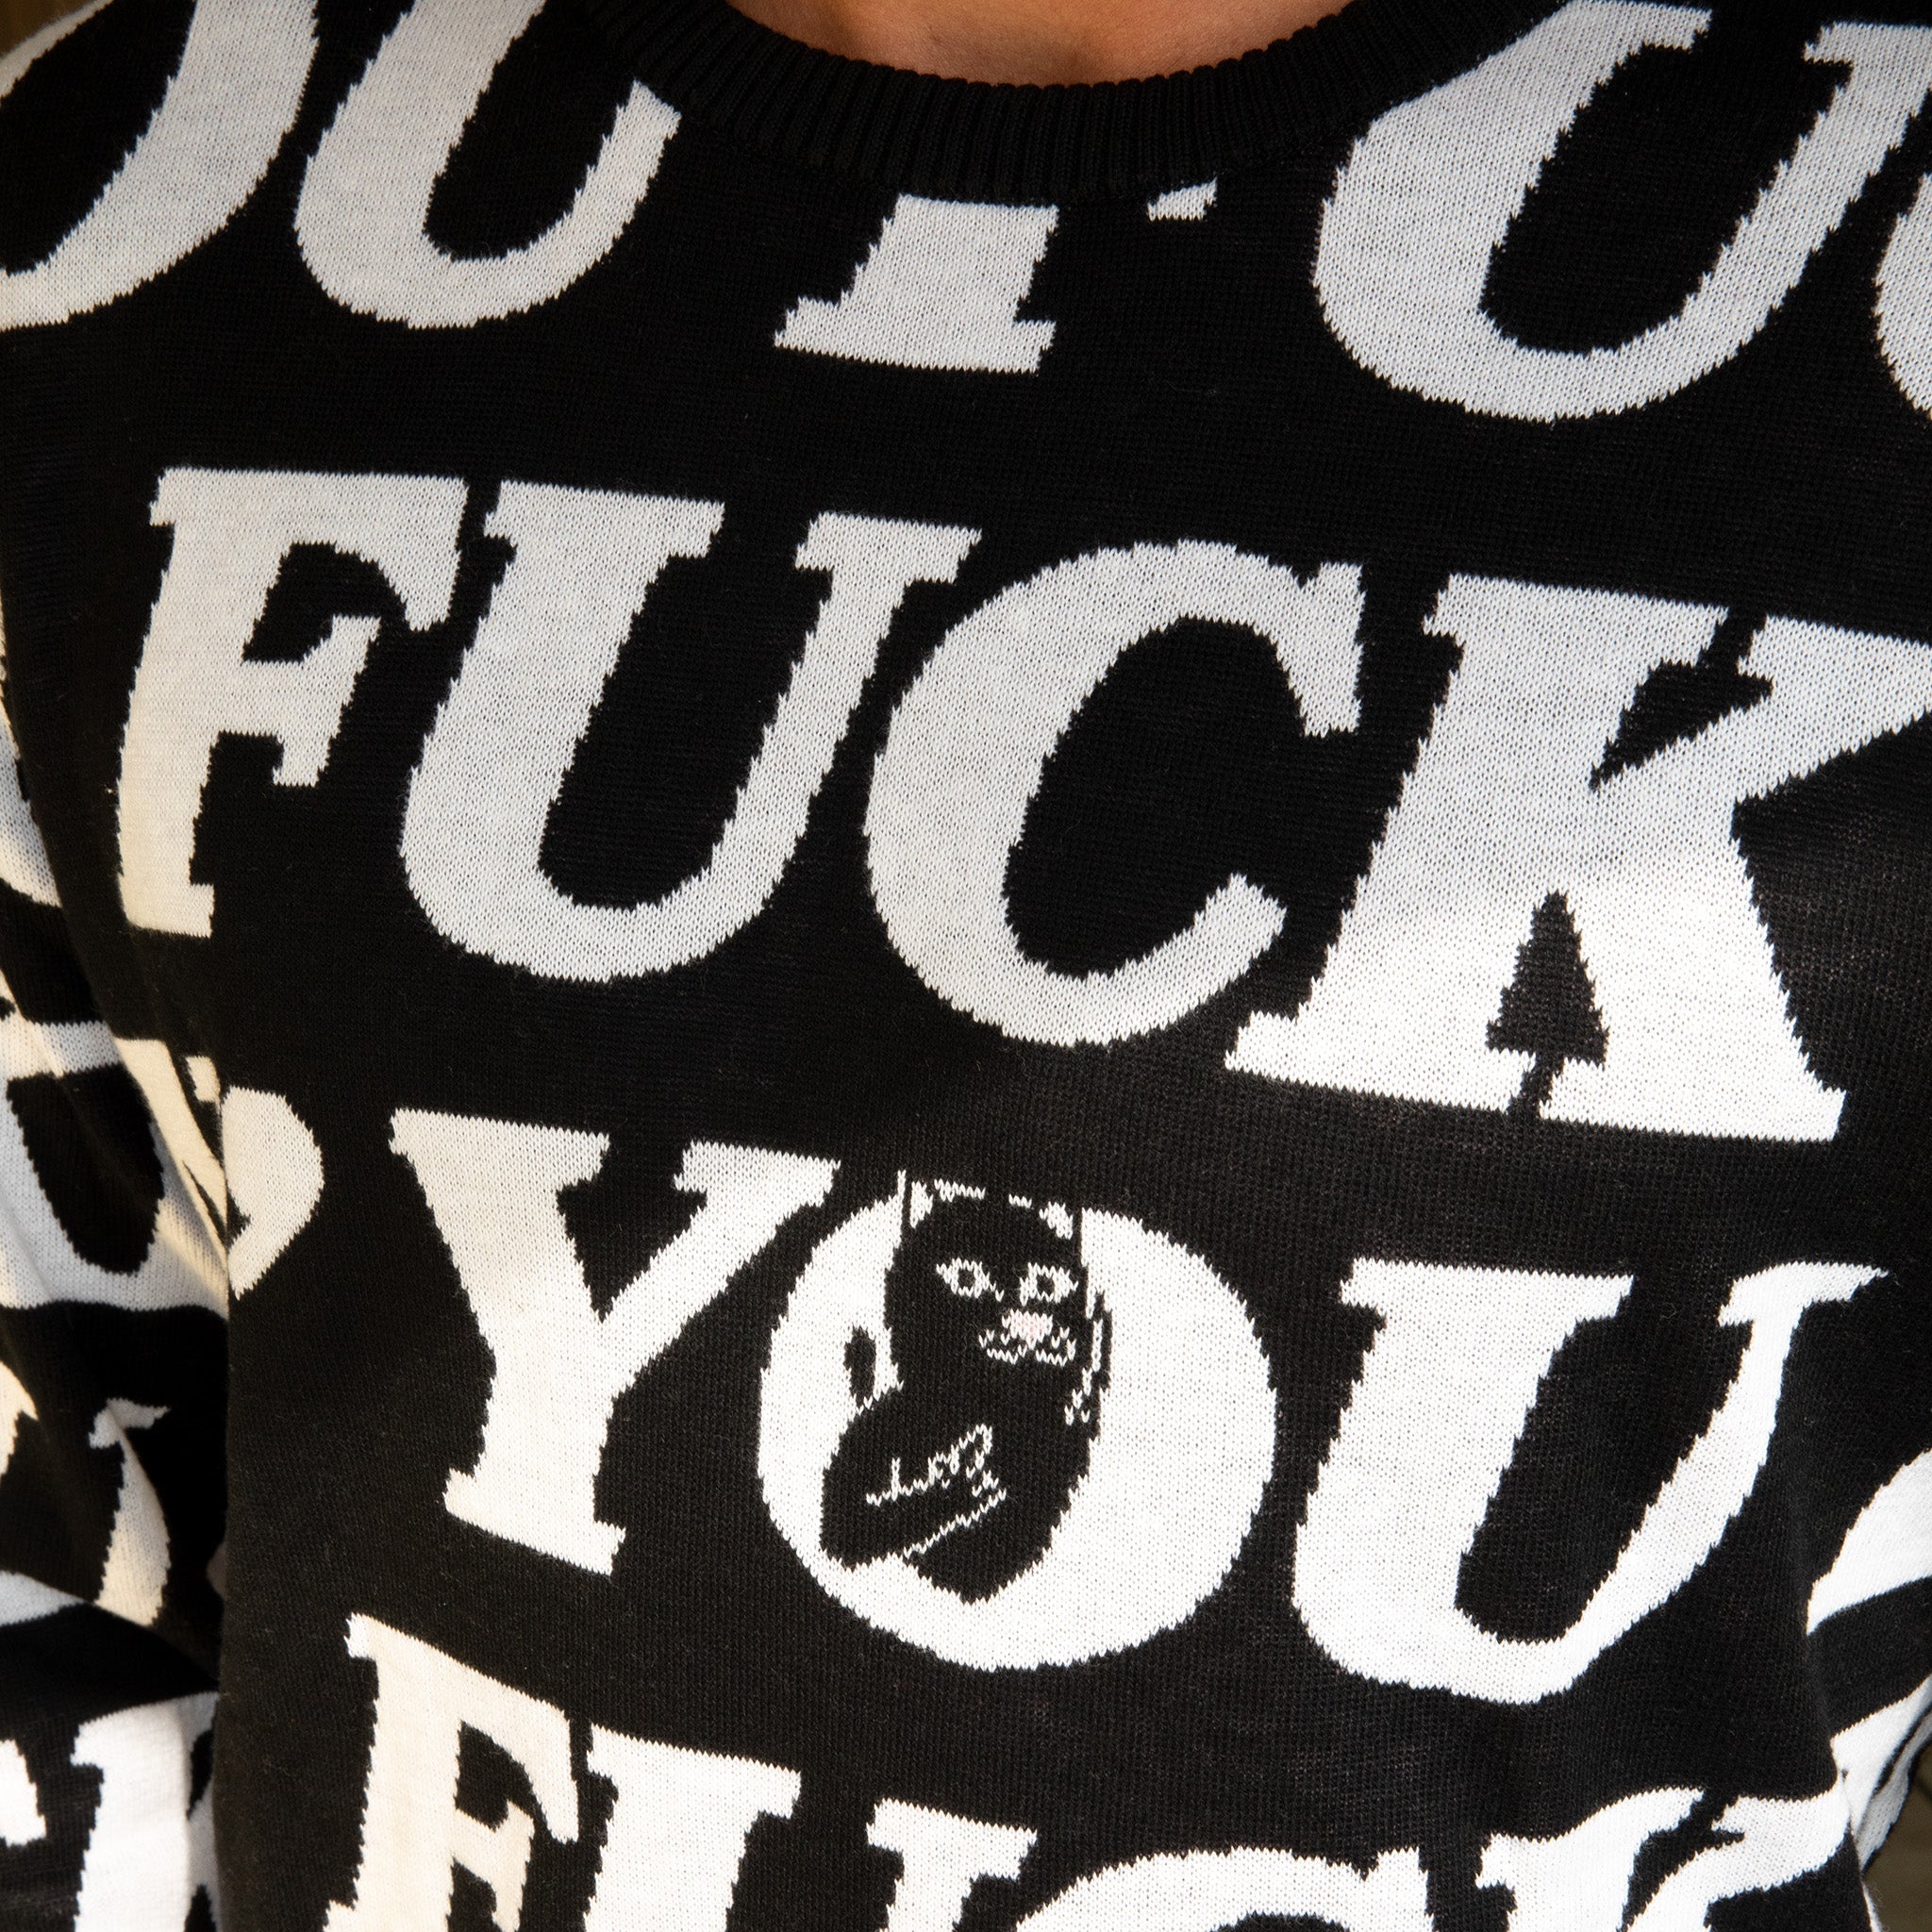 Fuck You Knit Sweater (Black)